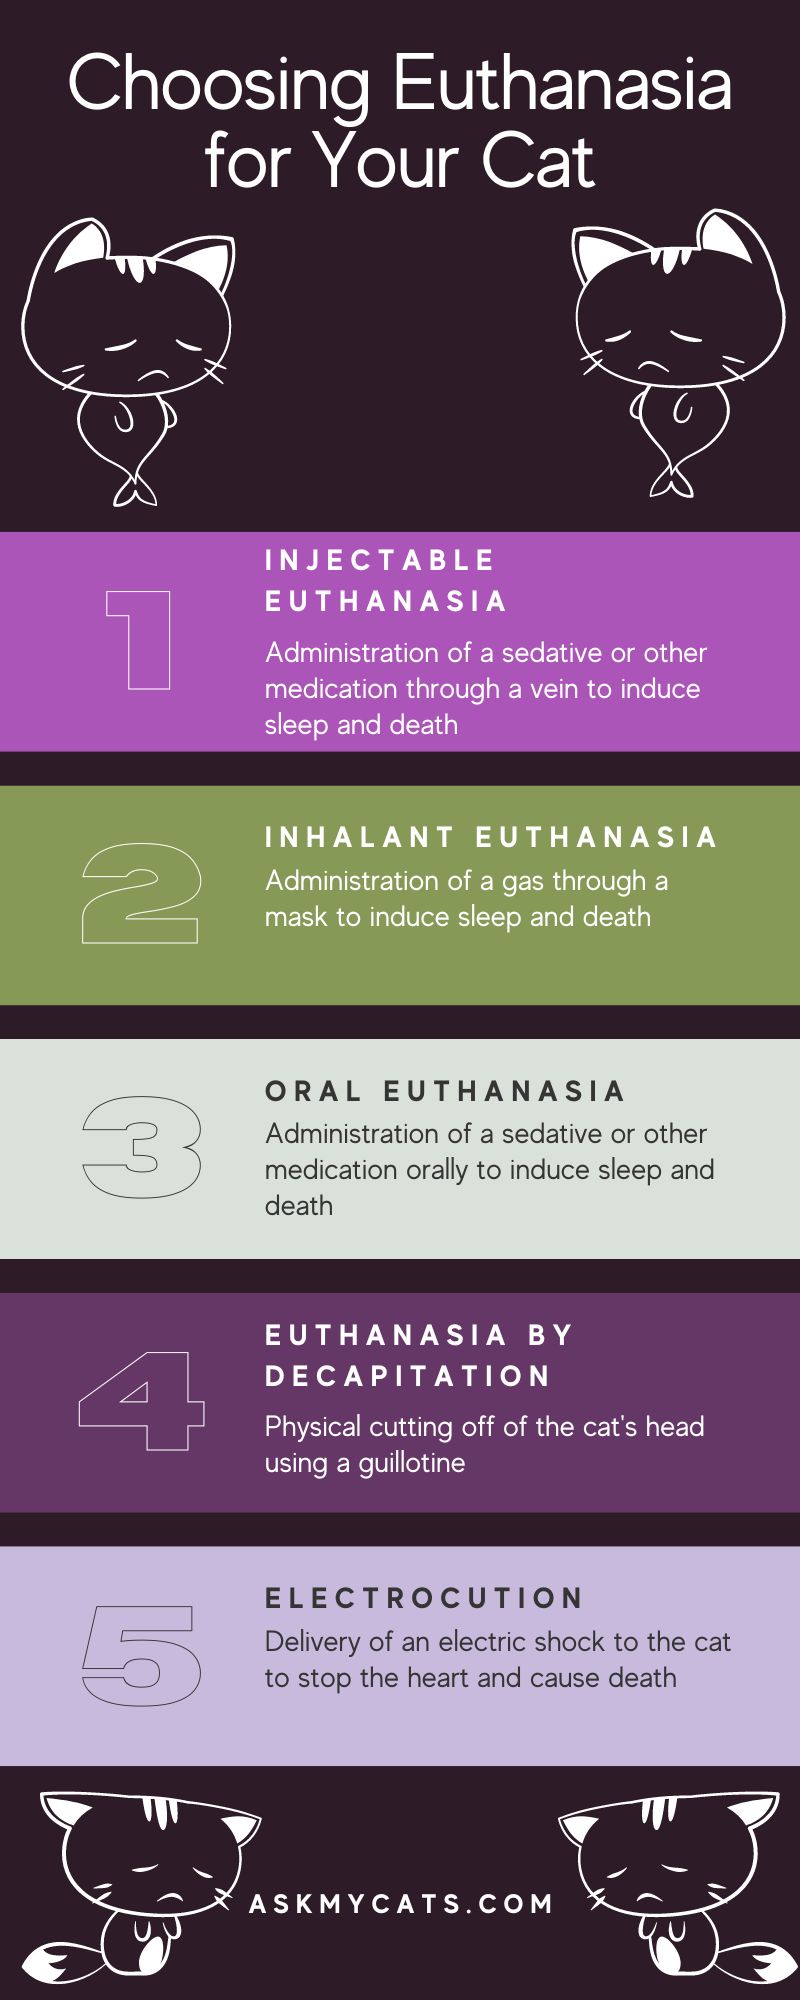 Choosing Euthanasia for Your Cat (Infographic)